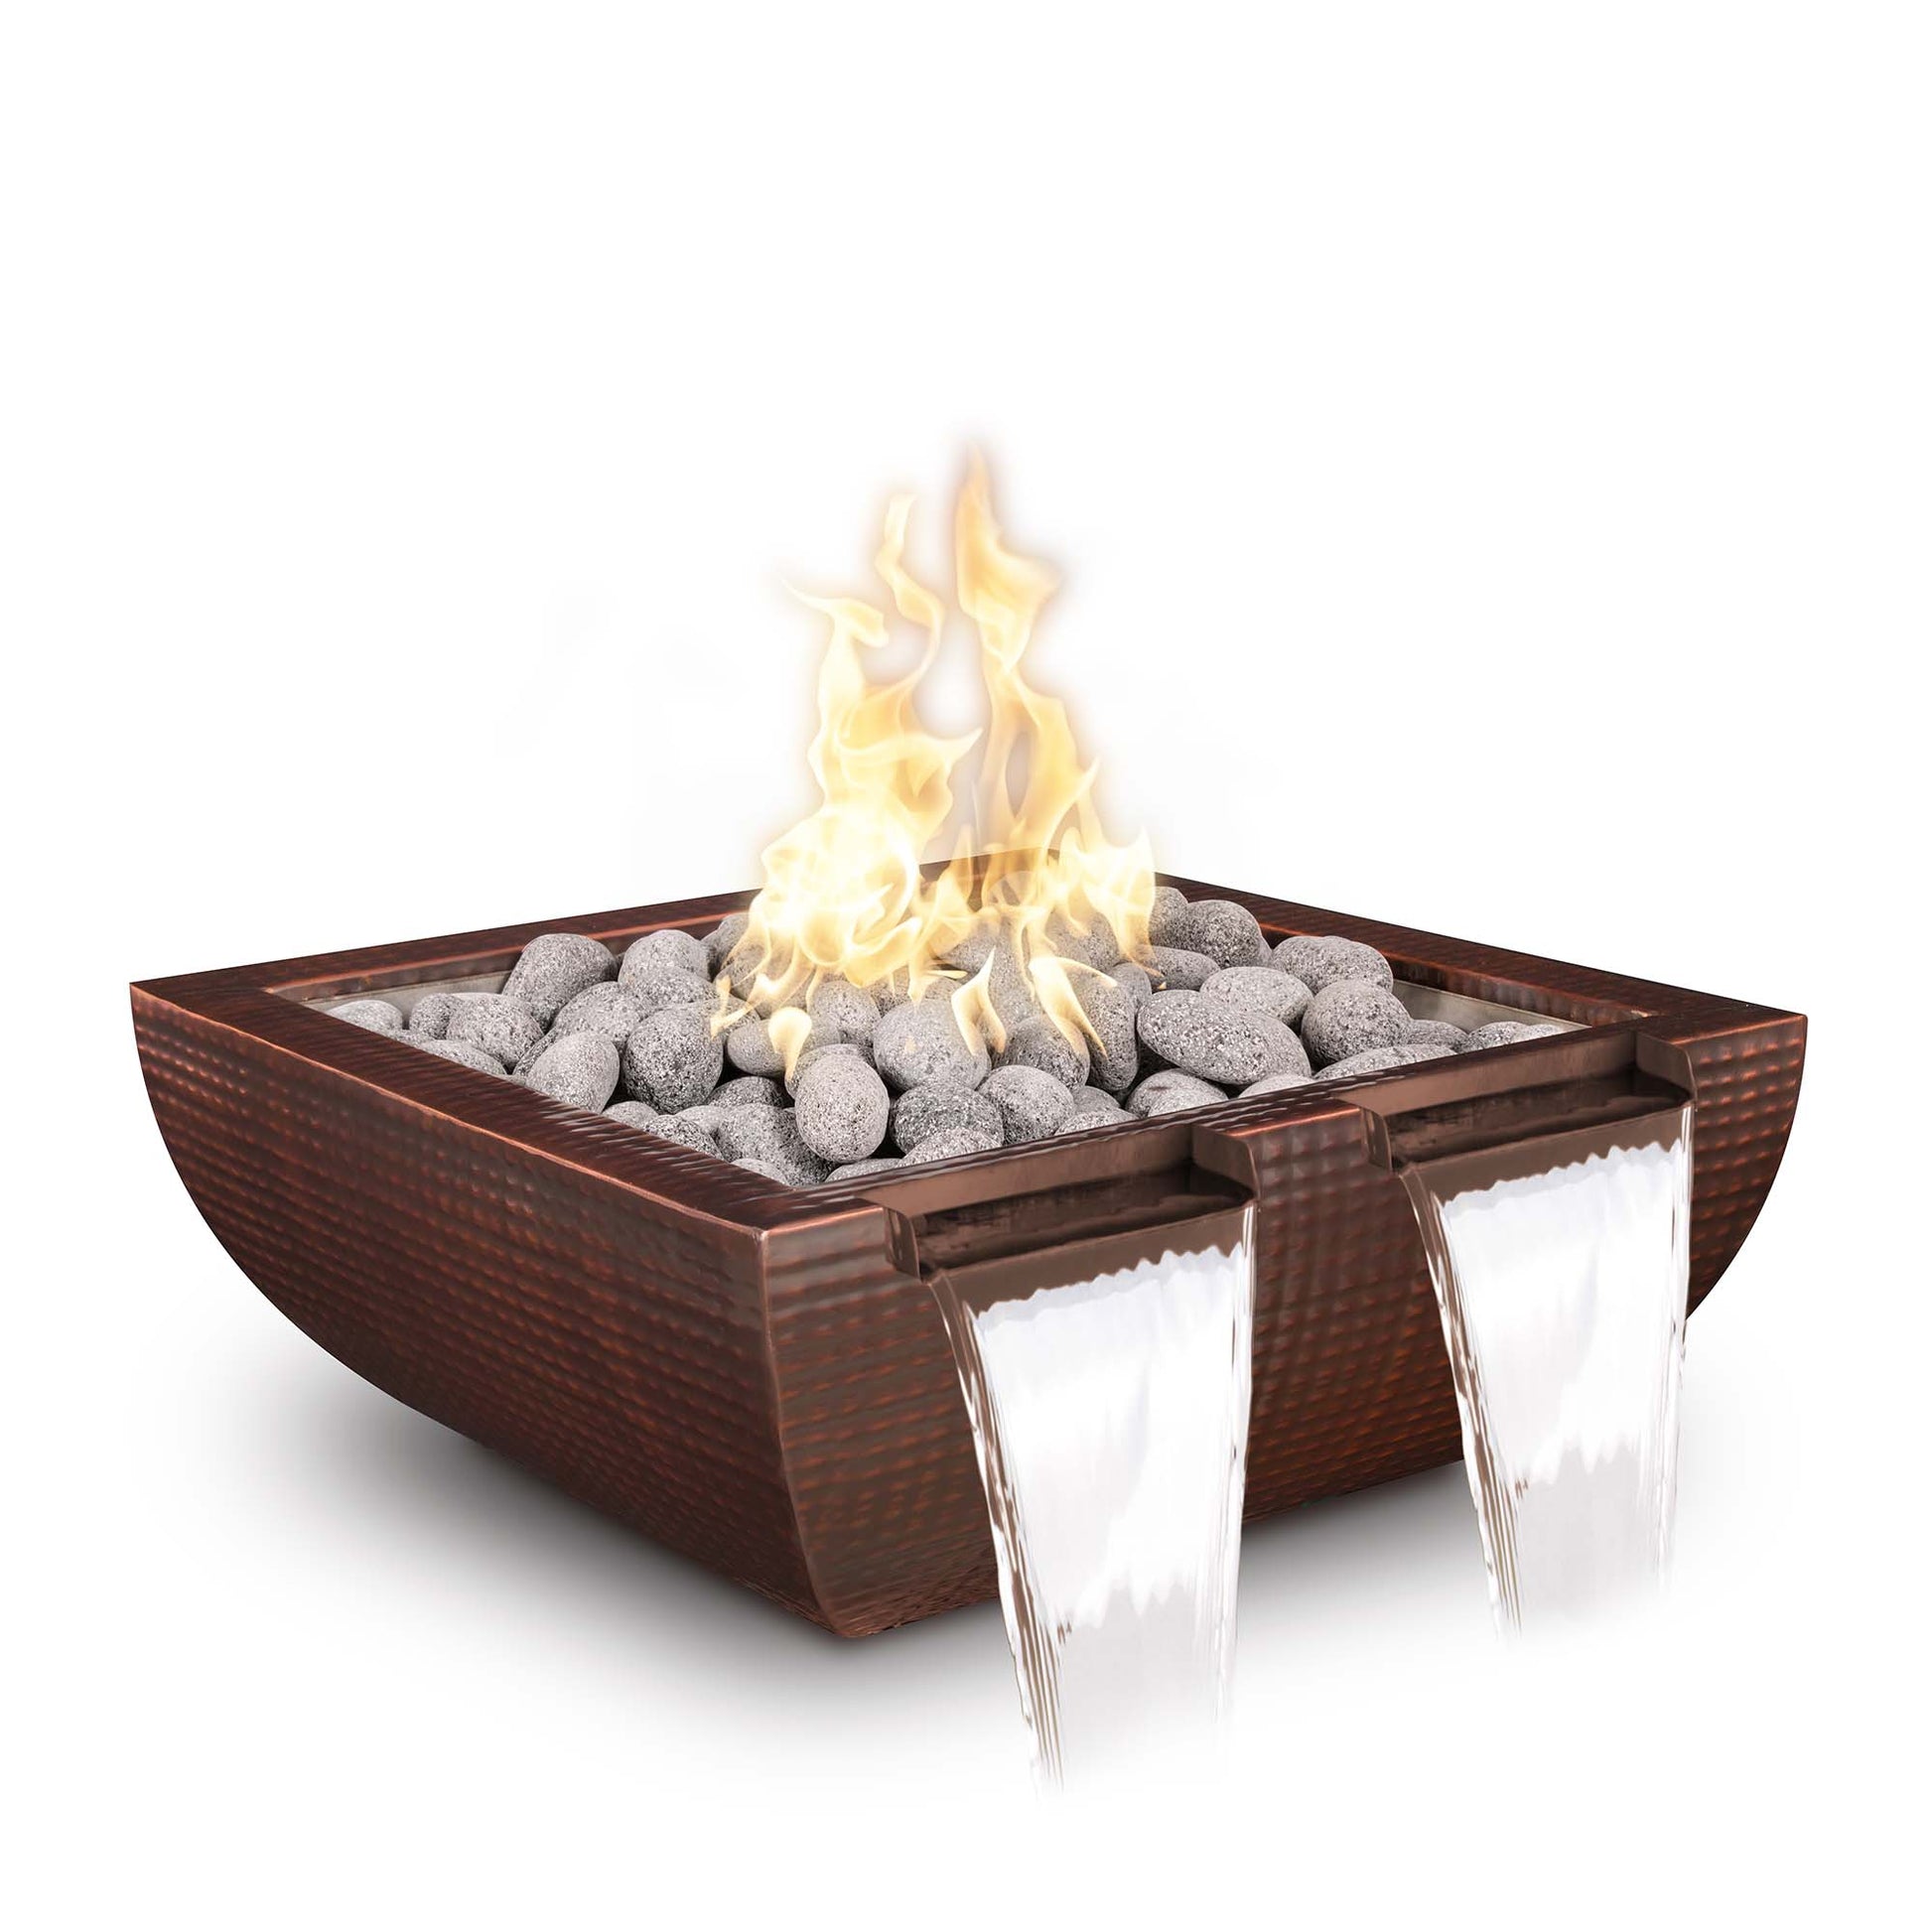 The Outdoor Plus Avalon Twin Spill 36" White Powder Coated Metal Liquid Propane Fire & Water Bowl with Match Lit Ignition